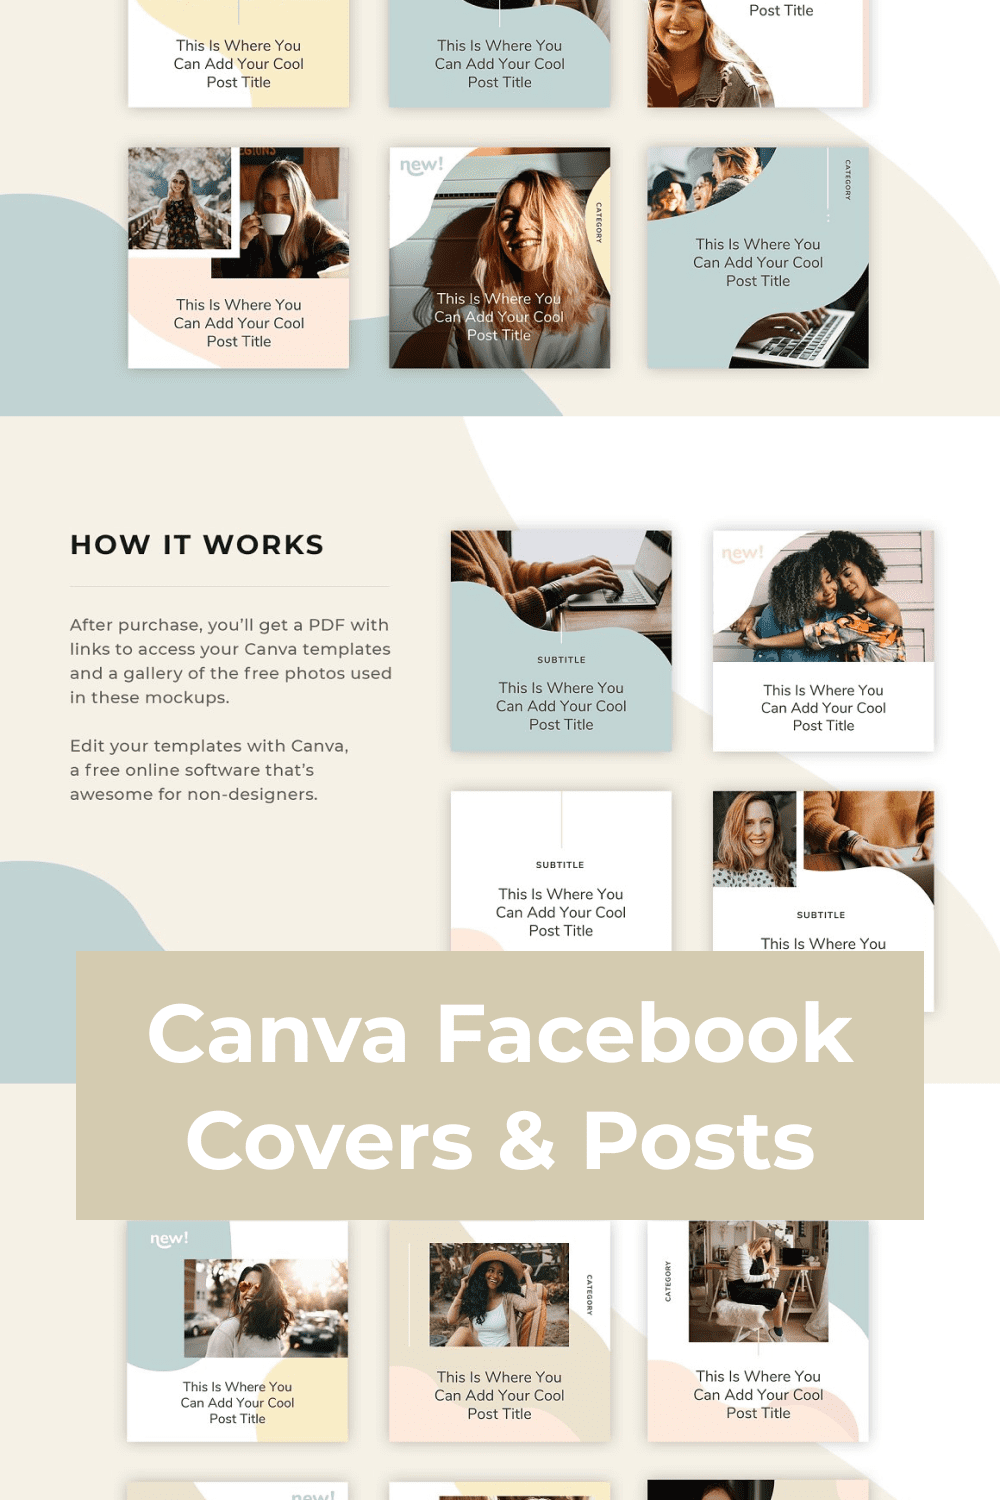 You can use this template for Facebook posts and covers.